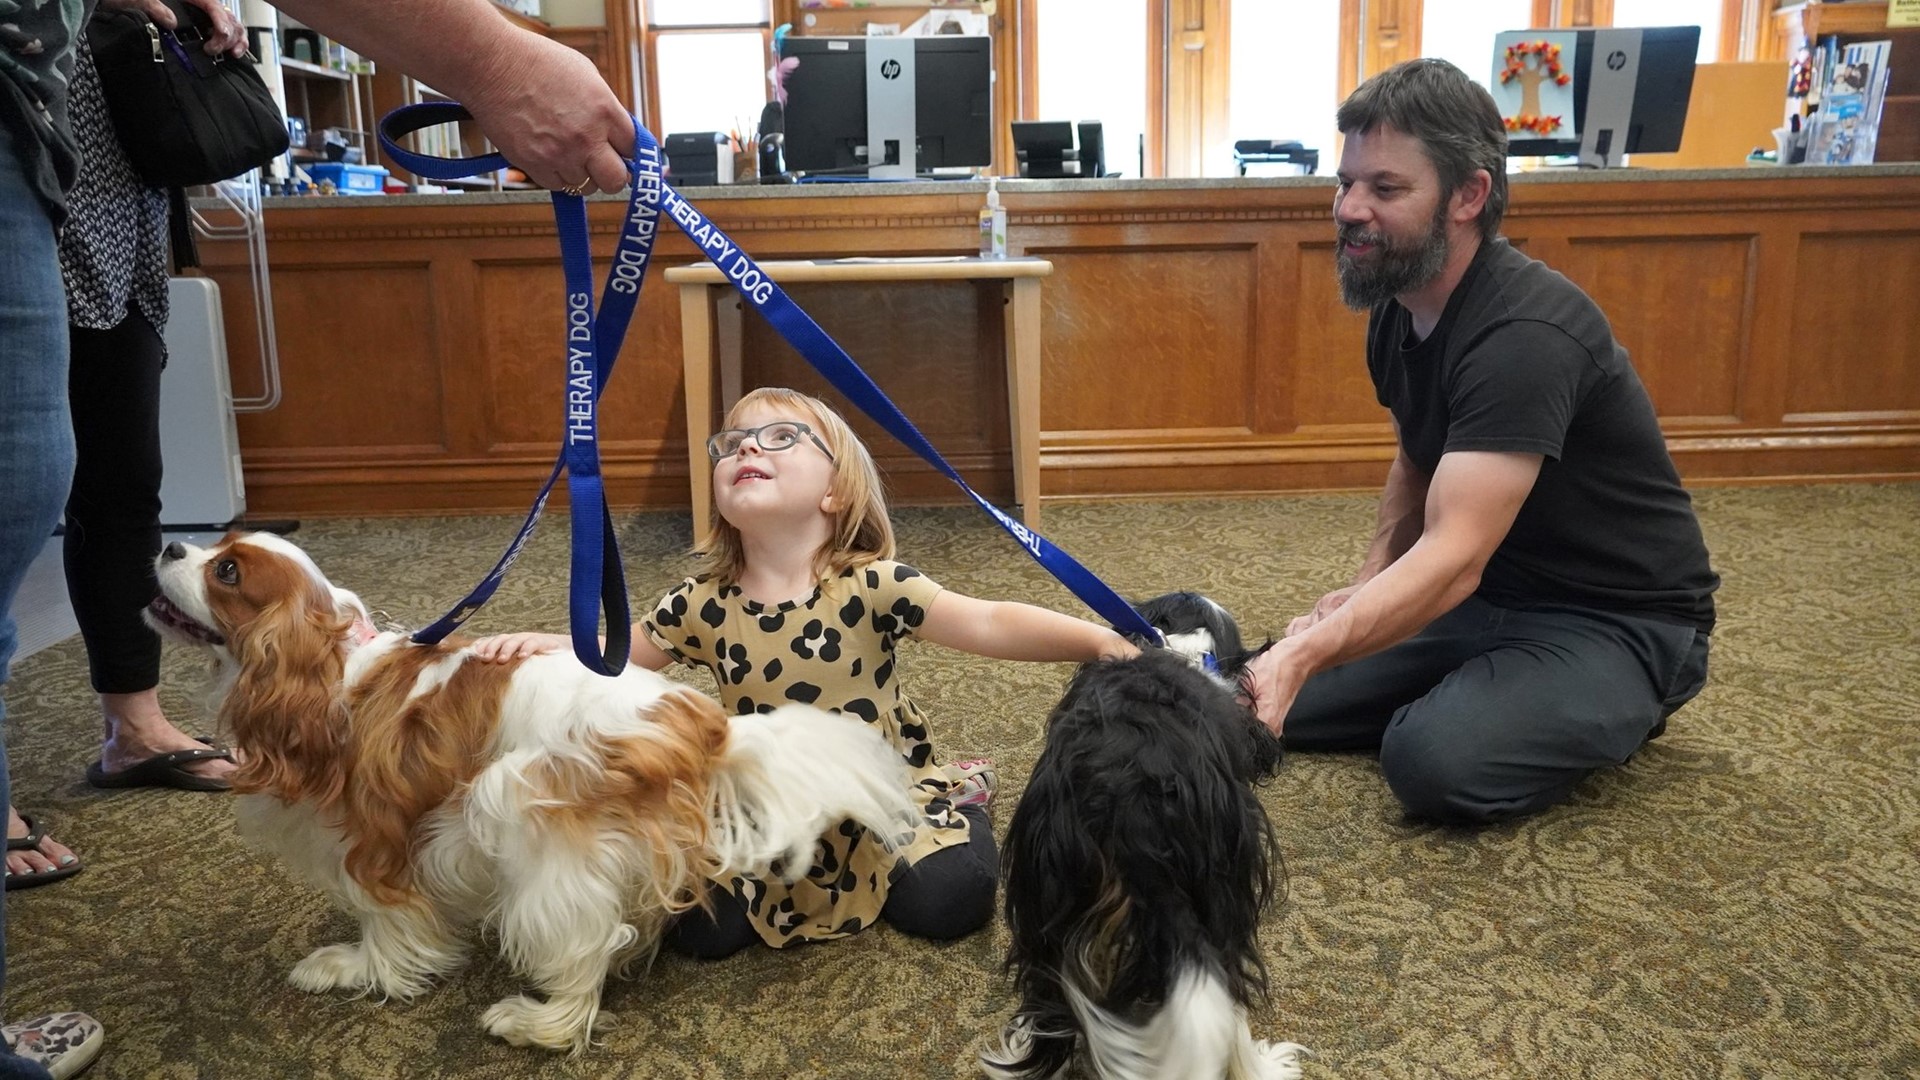 Breezy and Dolly are two therapy dogs who have been trained to keep kids calm while they practice reading in a safe, judgment free zone.